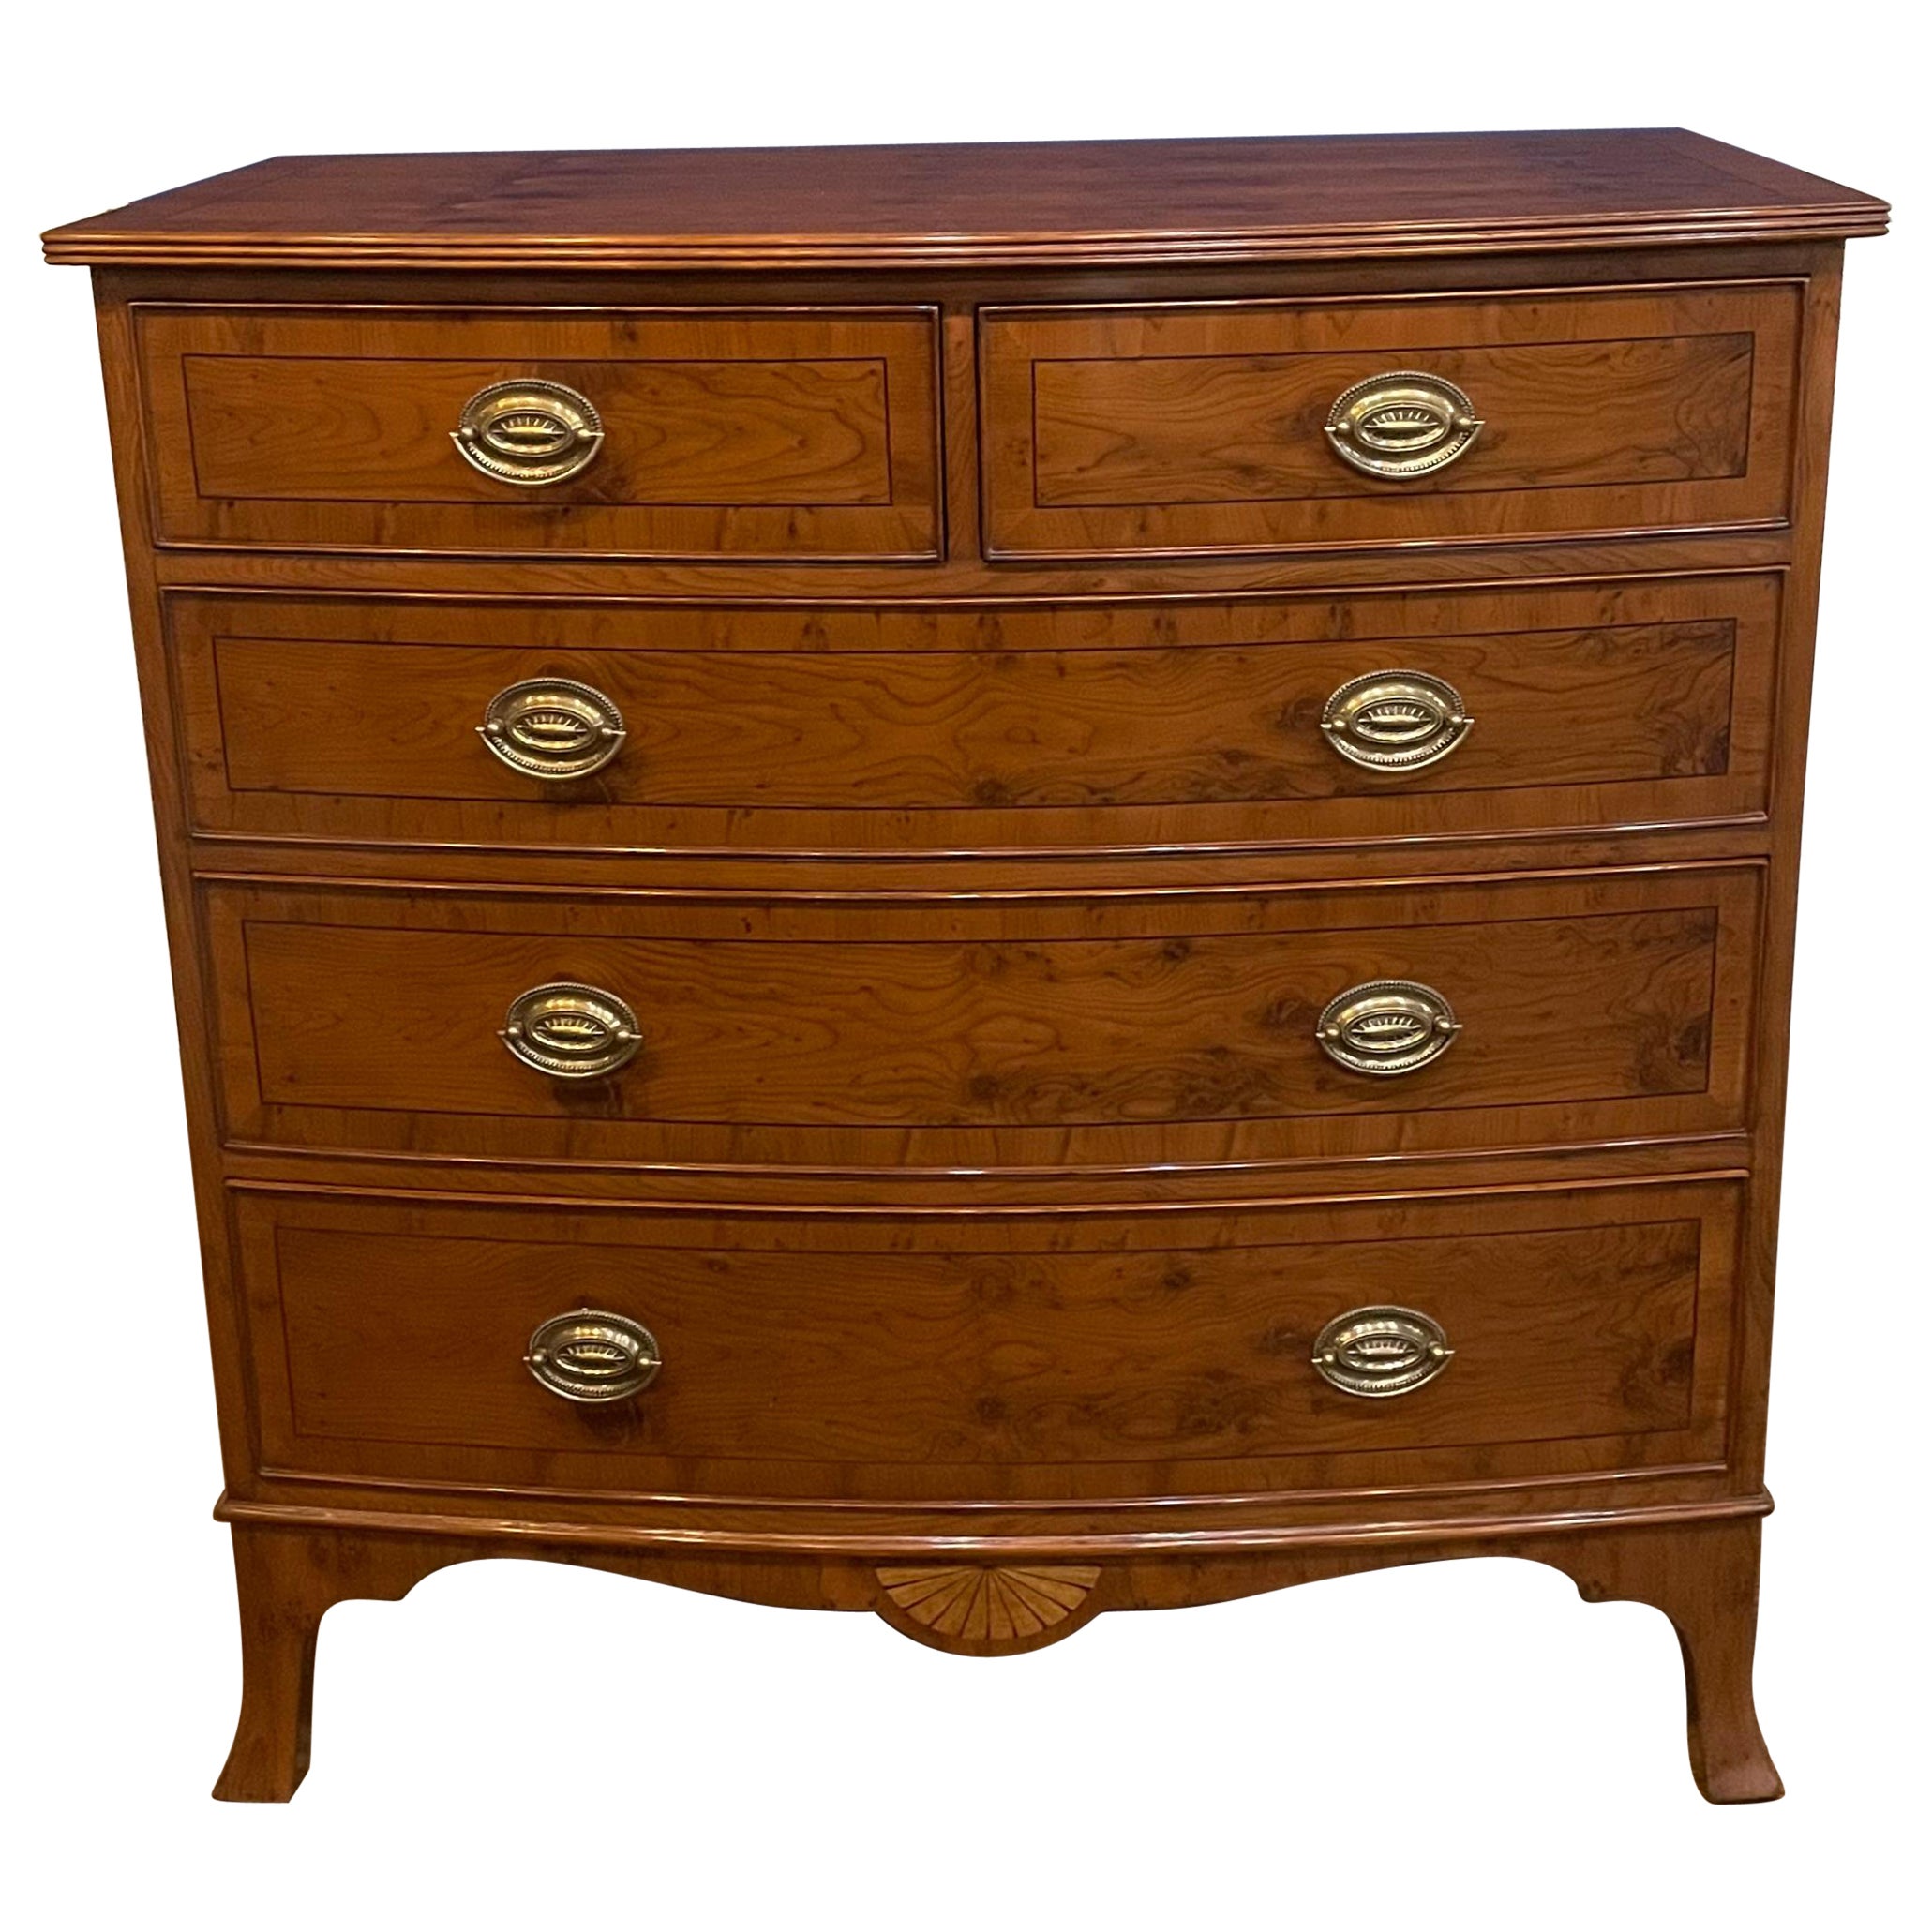 Classic Inlaid Bow Front Yew Wood Chest by Leighton Hall - Showroom Sample  For Sale